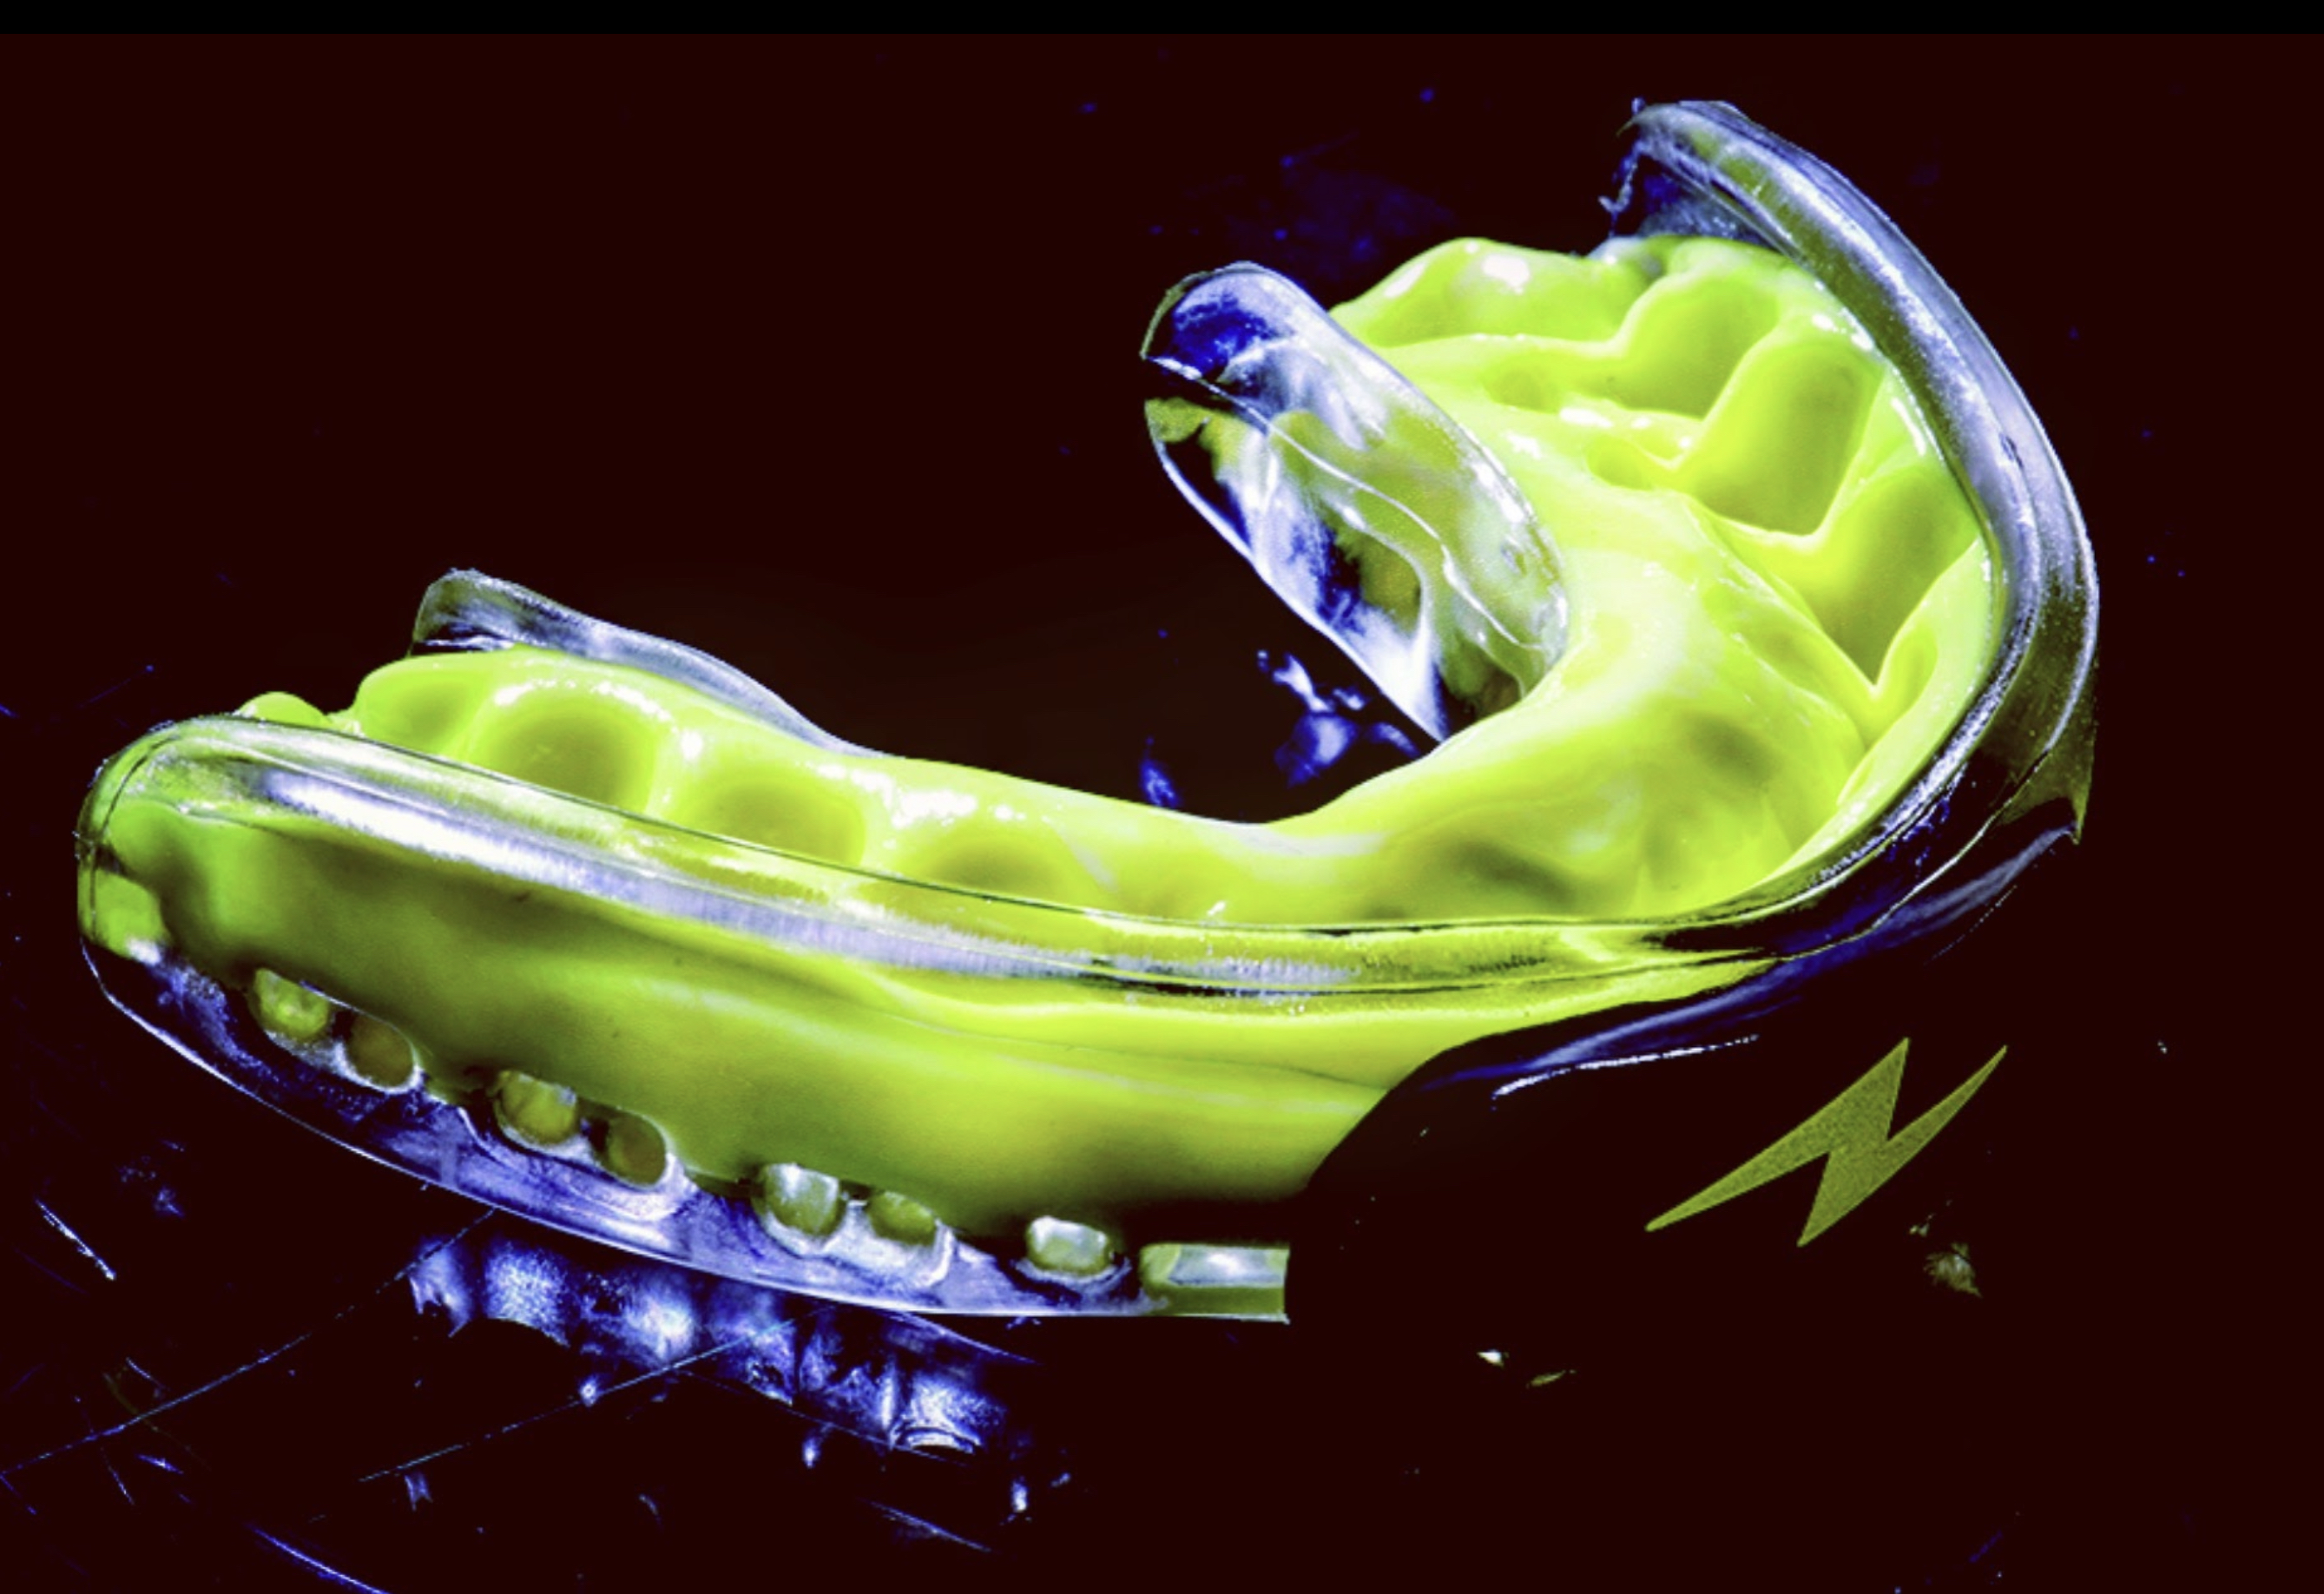 ZONE Mouthguard Leaves Dicks Sporting Goods After 5 Years and Re-Launches with New Technology